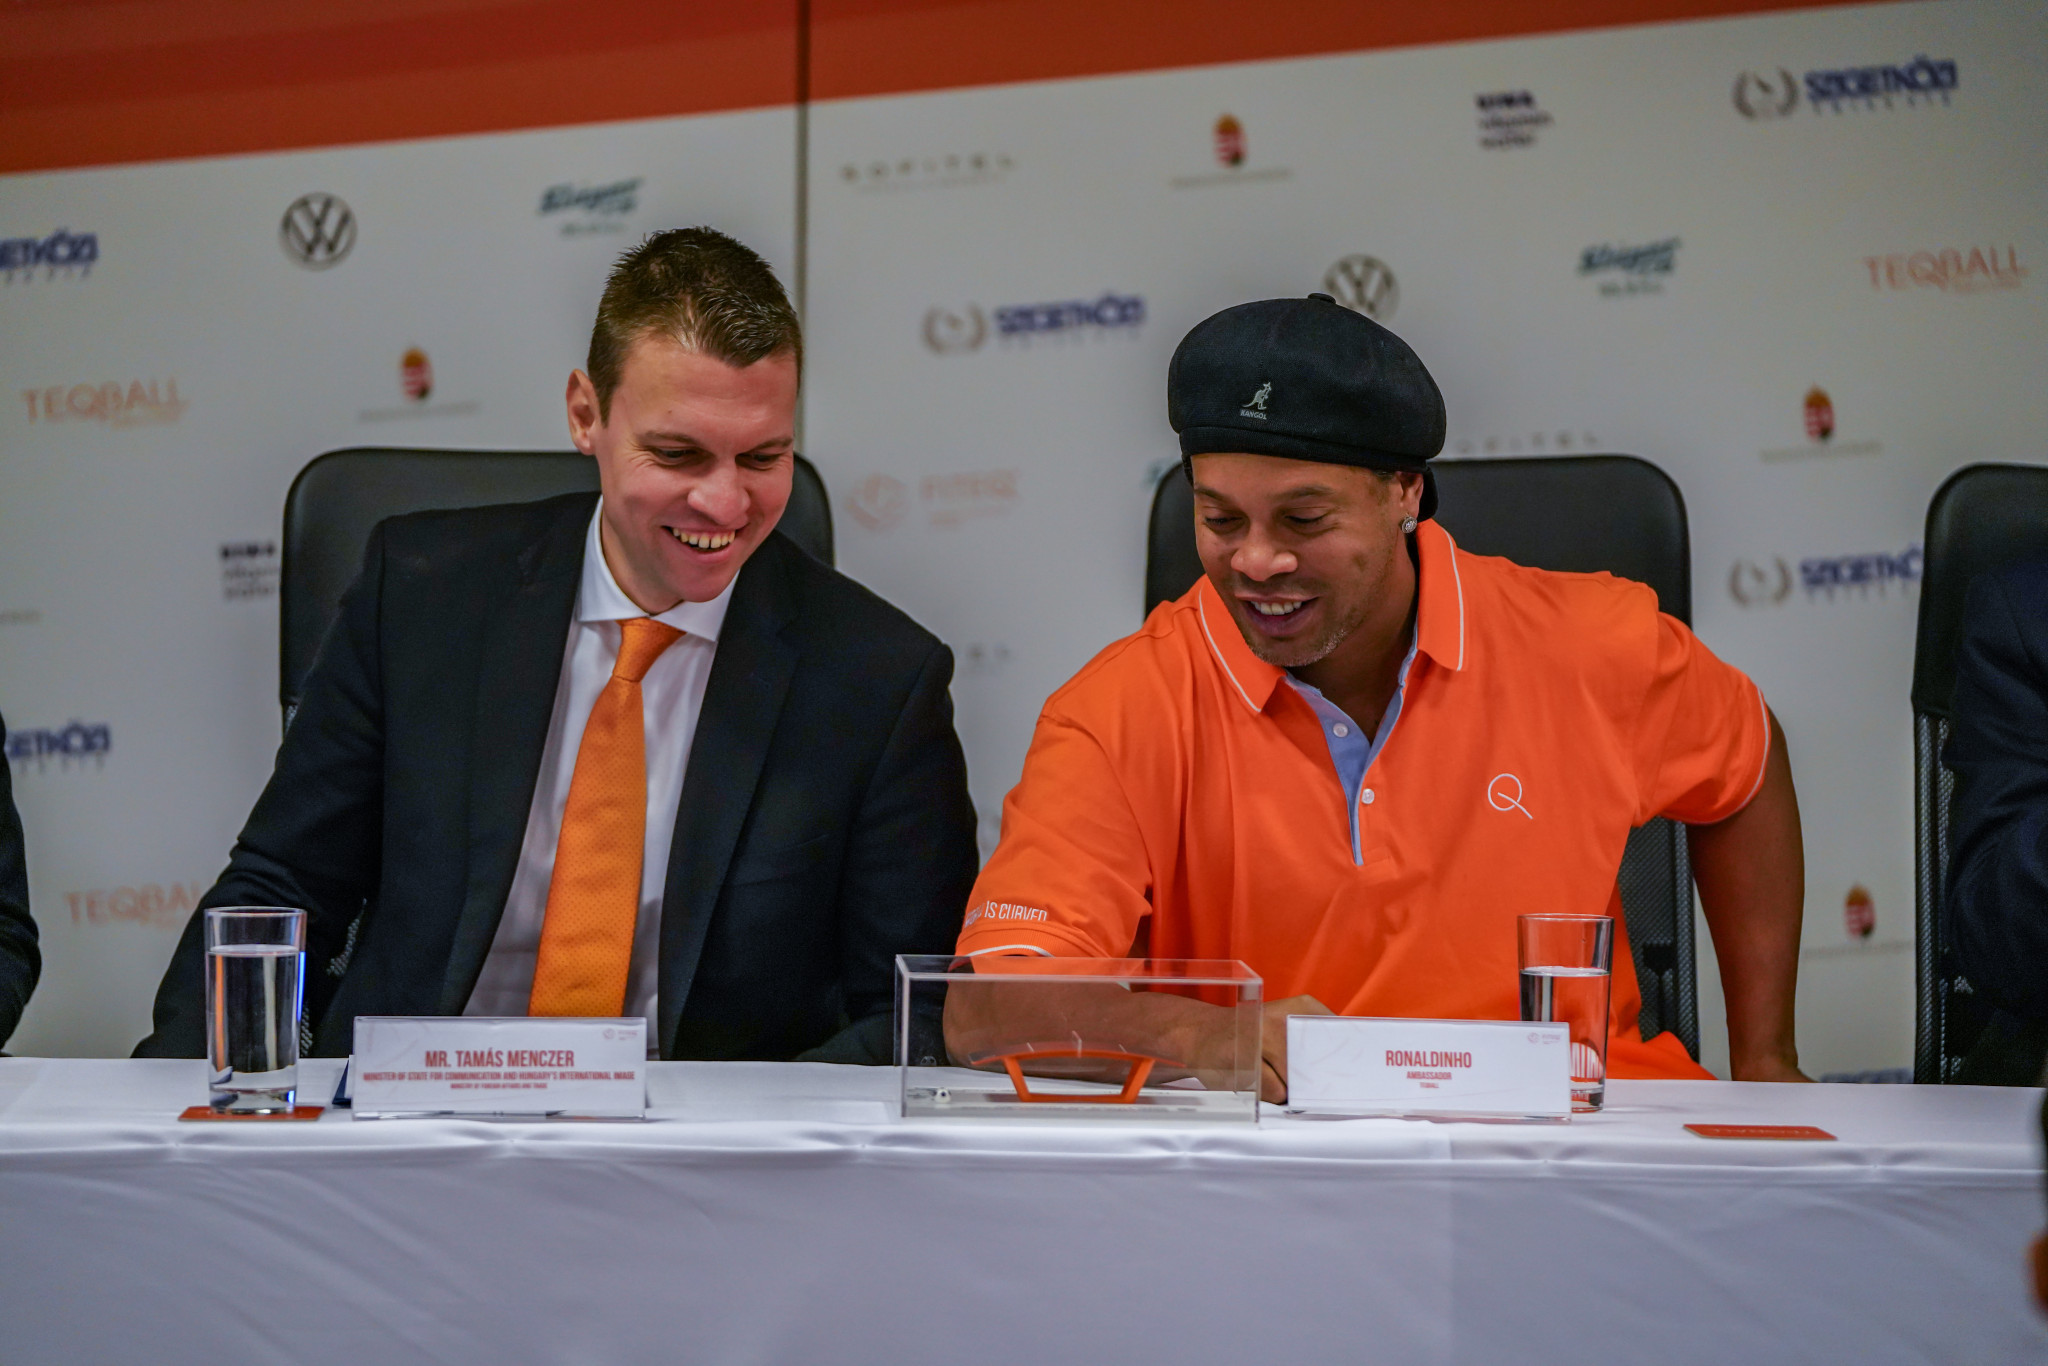 Ronaldinho then took part in a press conference ©FITEQ